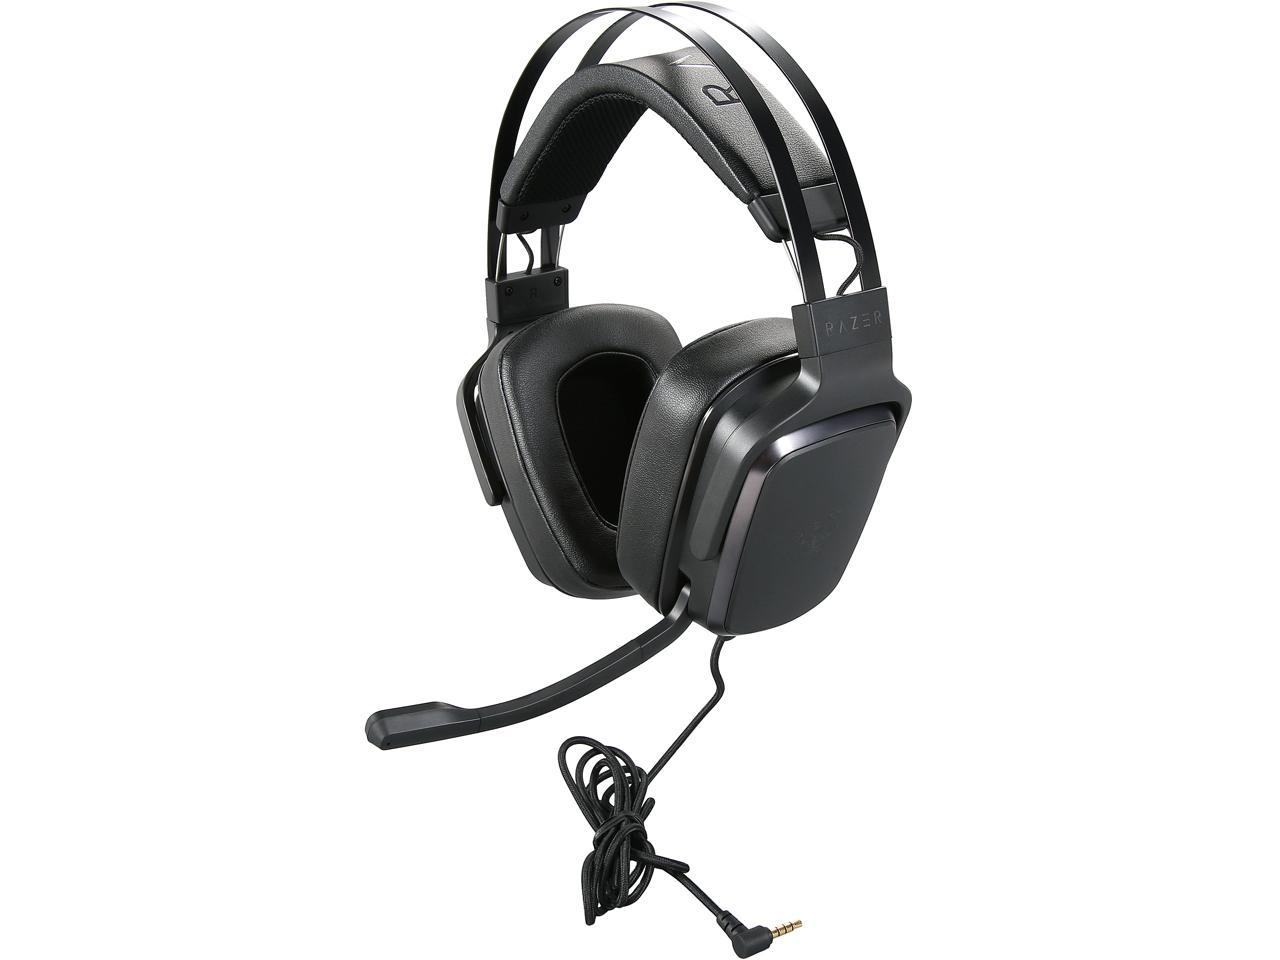 Refurbished Razer Tiamat 2.2 V2 Wired Circumaural Headset 7.1 Virtual Surround Sound Dual Subwoofer Drivers for PC, Xbox One, Playstation & Nintendo Switch